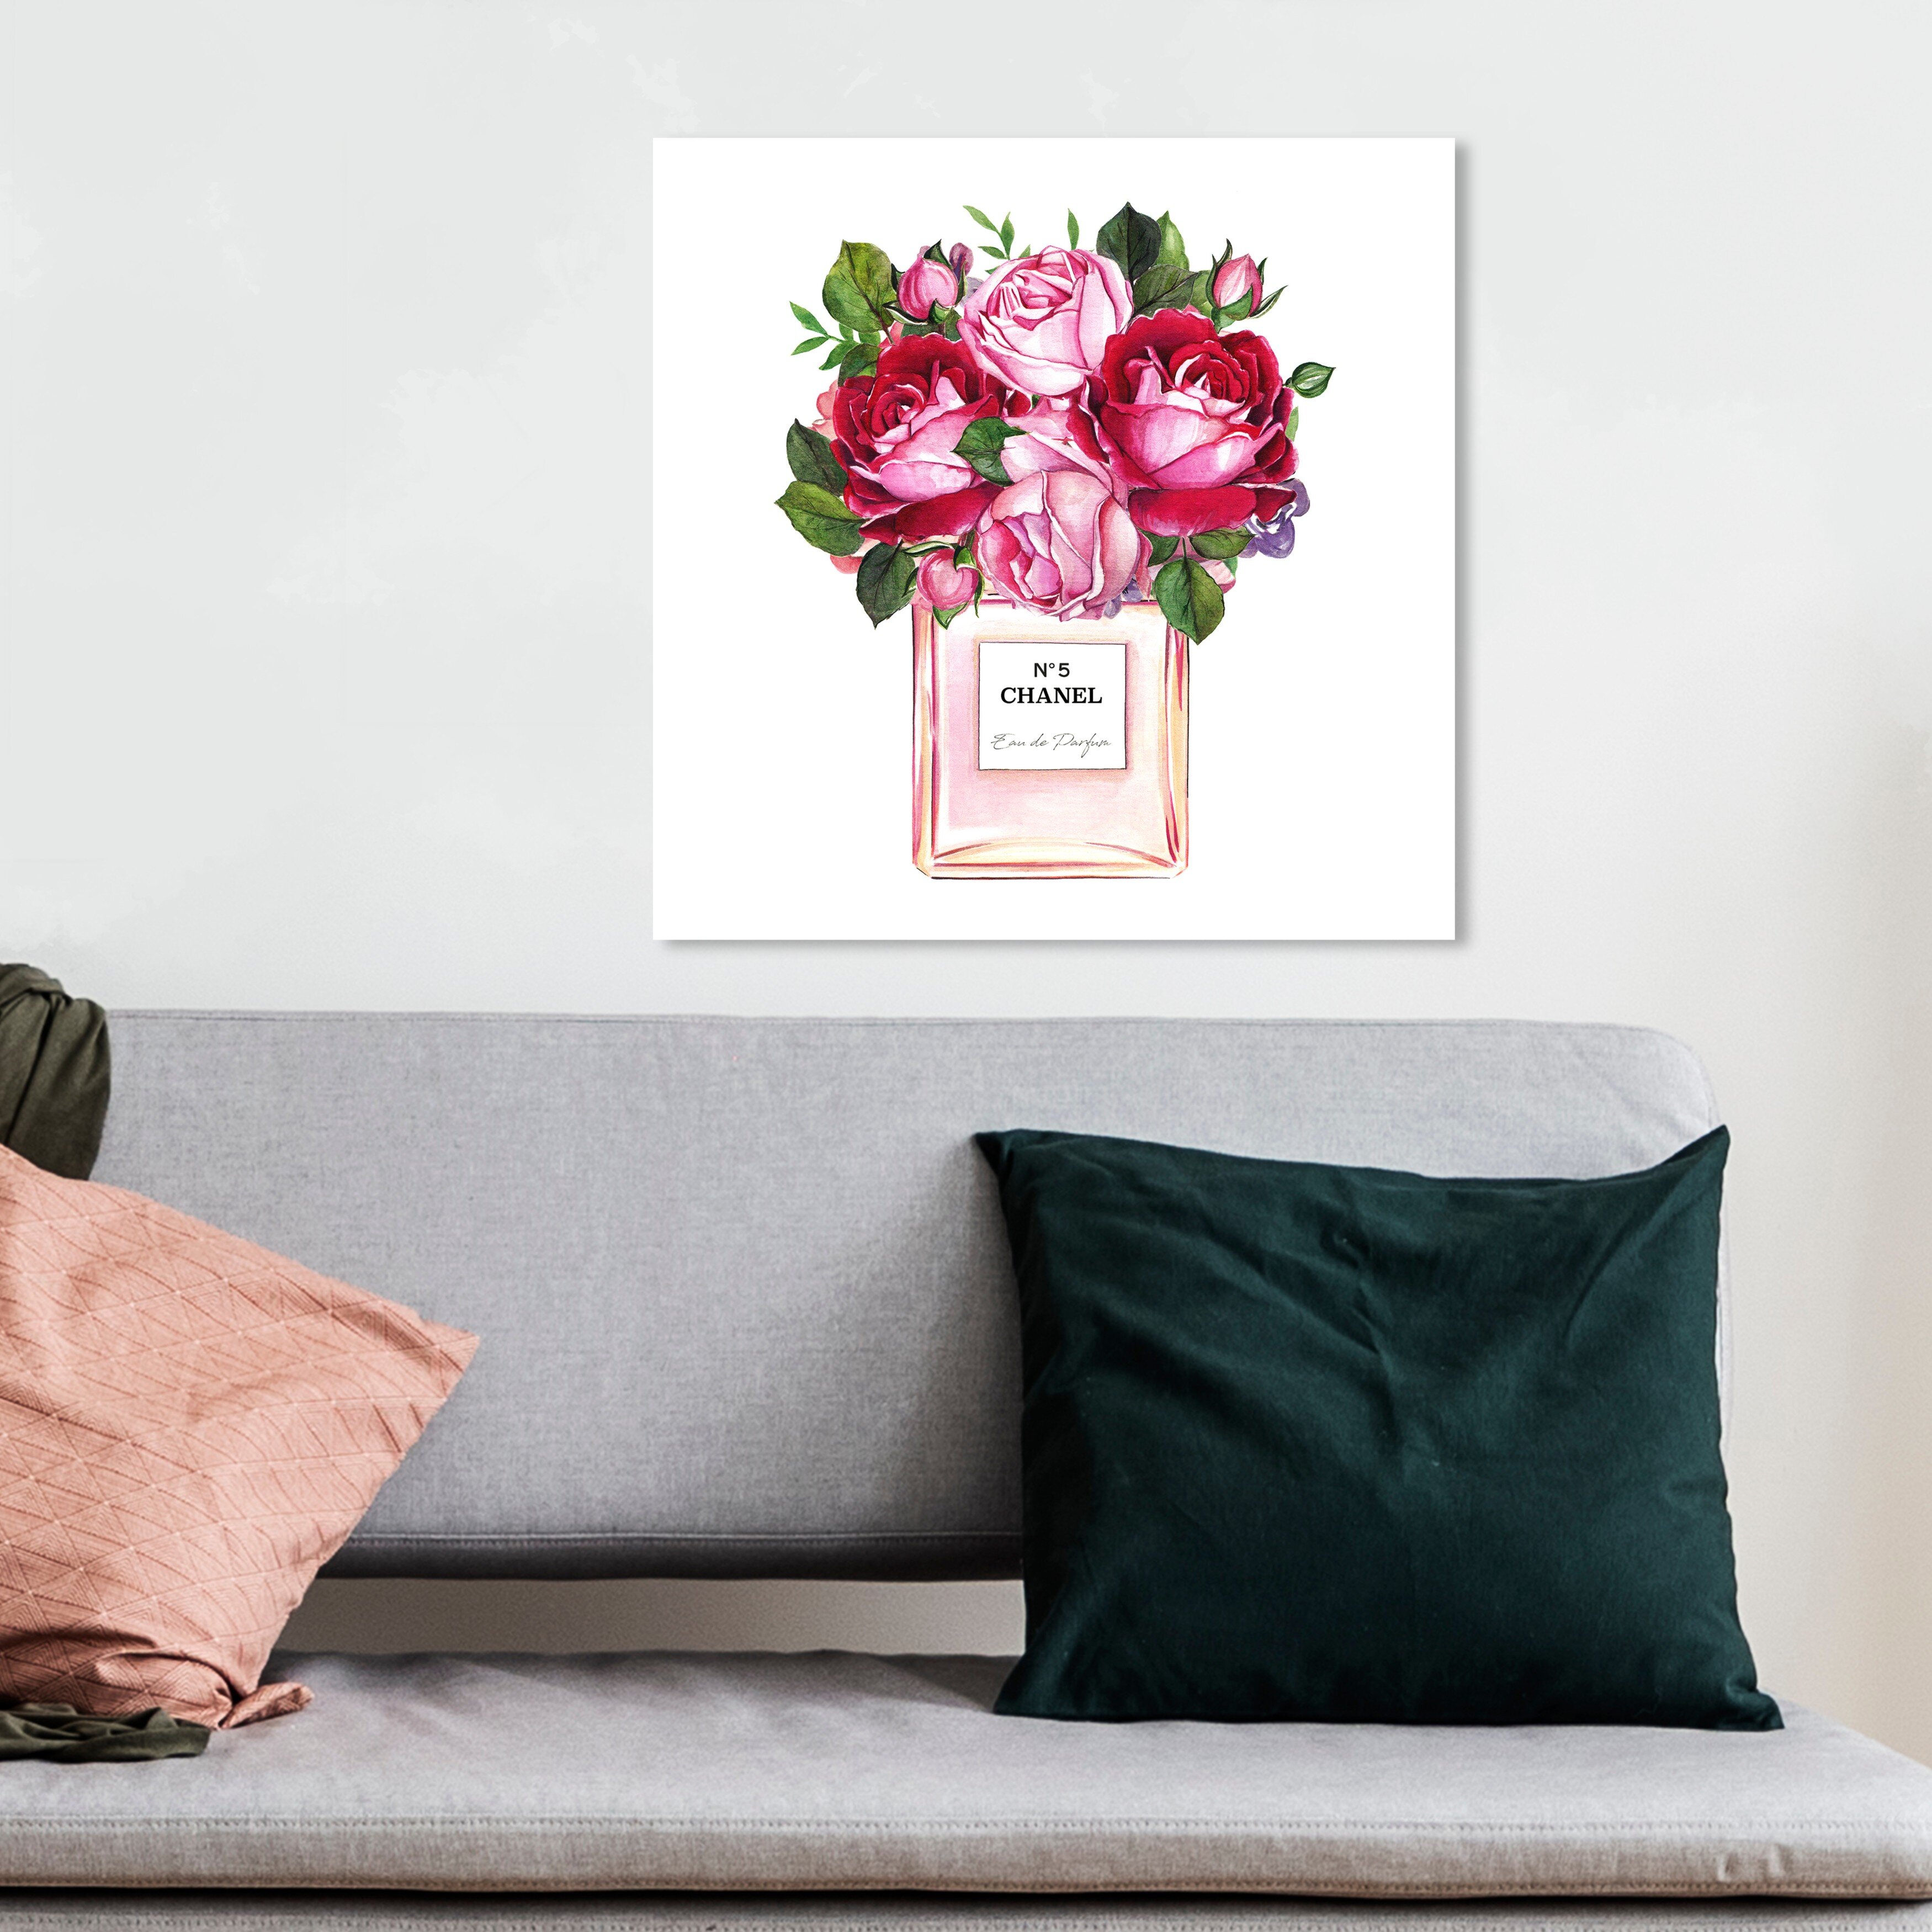 Fashion and Glam Doll Memories - Rose Scent Square Perfumes - Graphic Art Print on Canvas Rosdorf Park Format: Wrapped Canvas, Size: 12 H x 12 W x 1